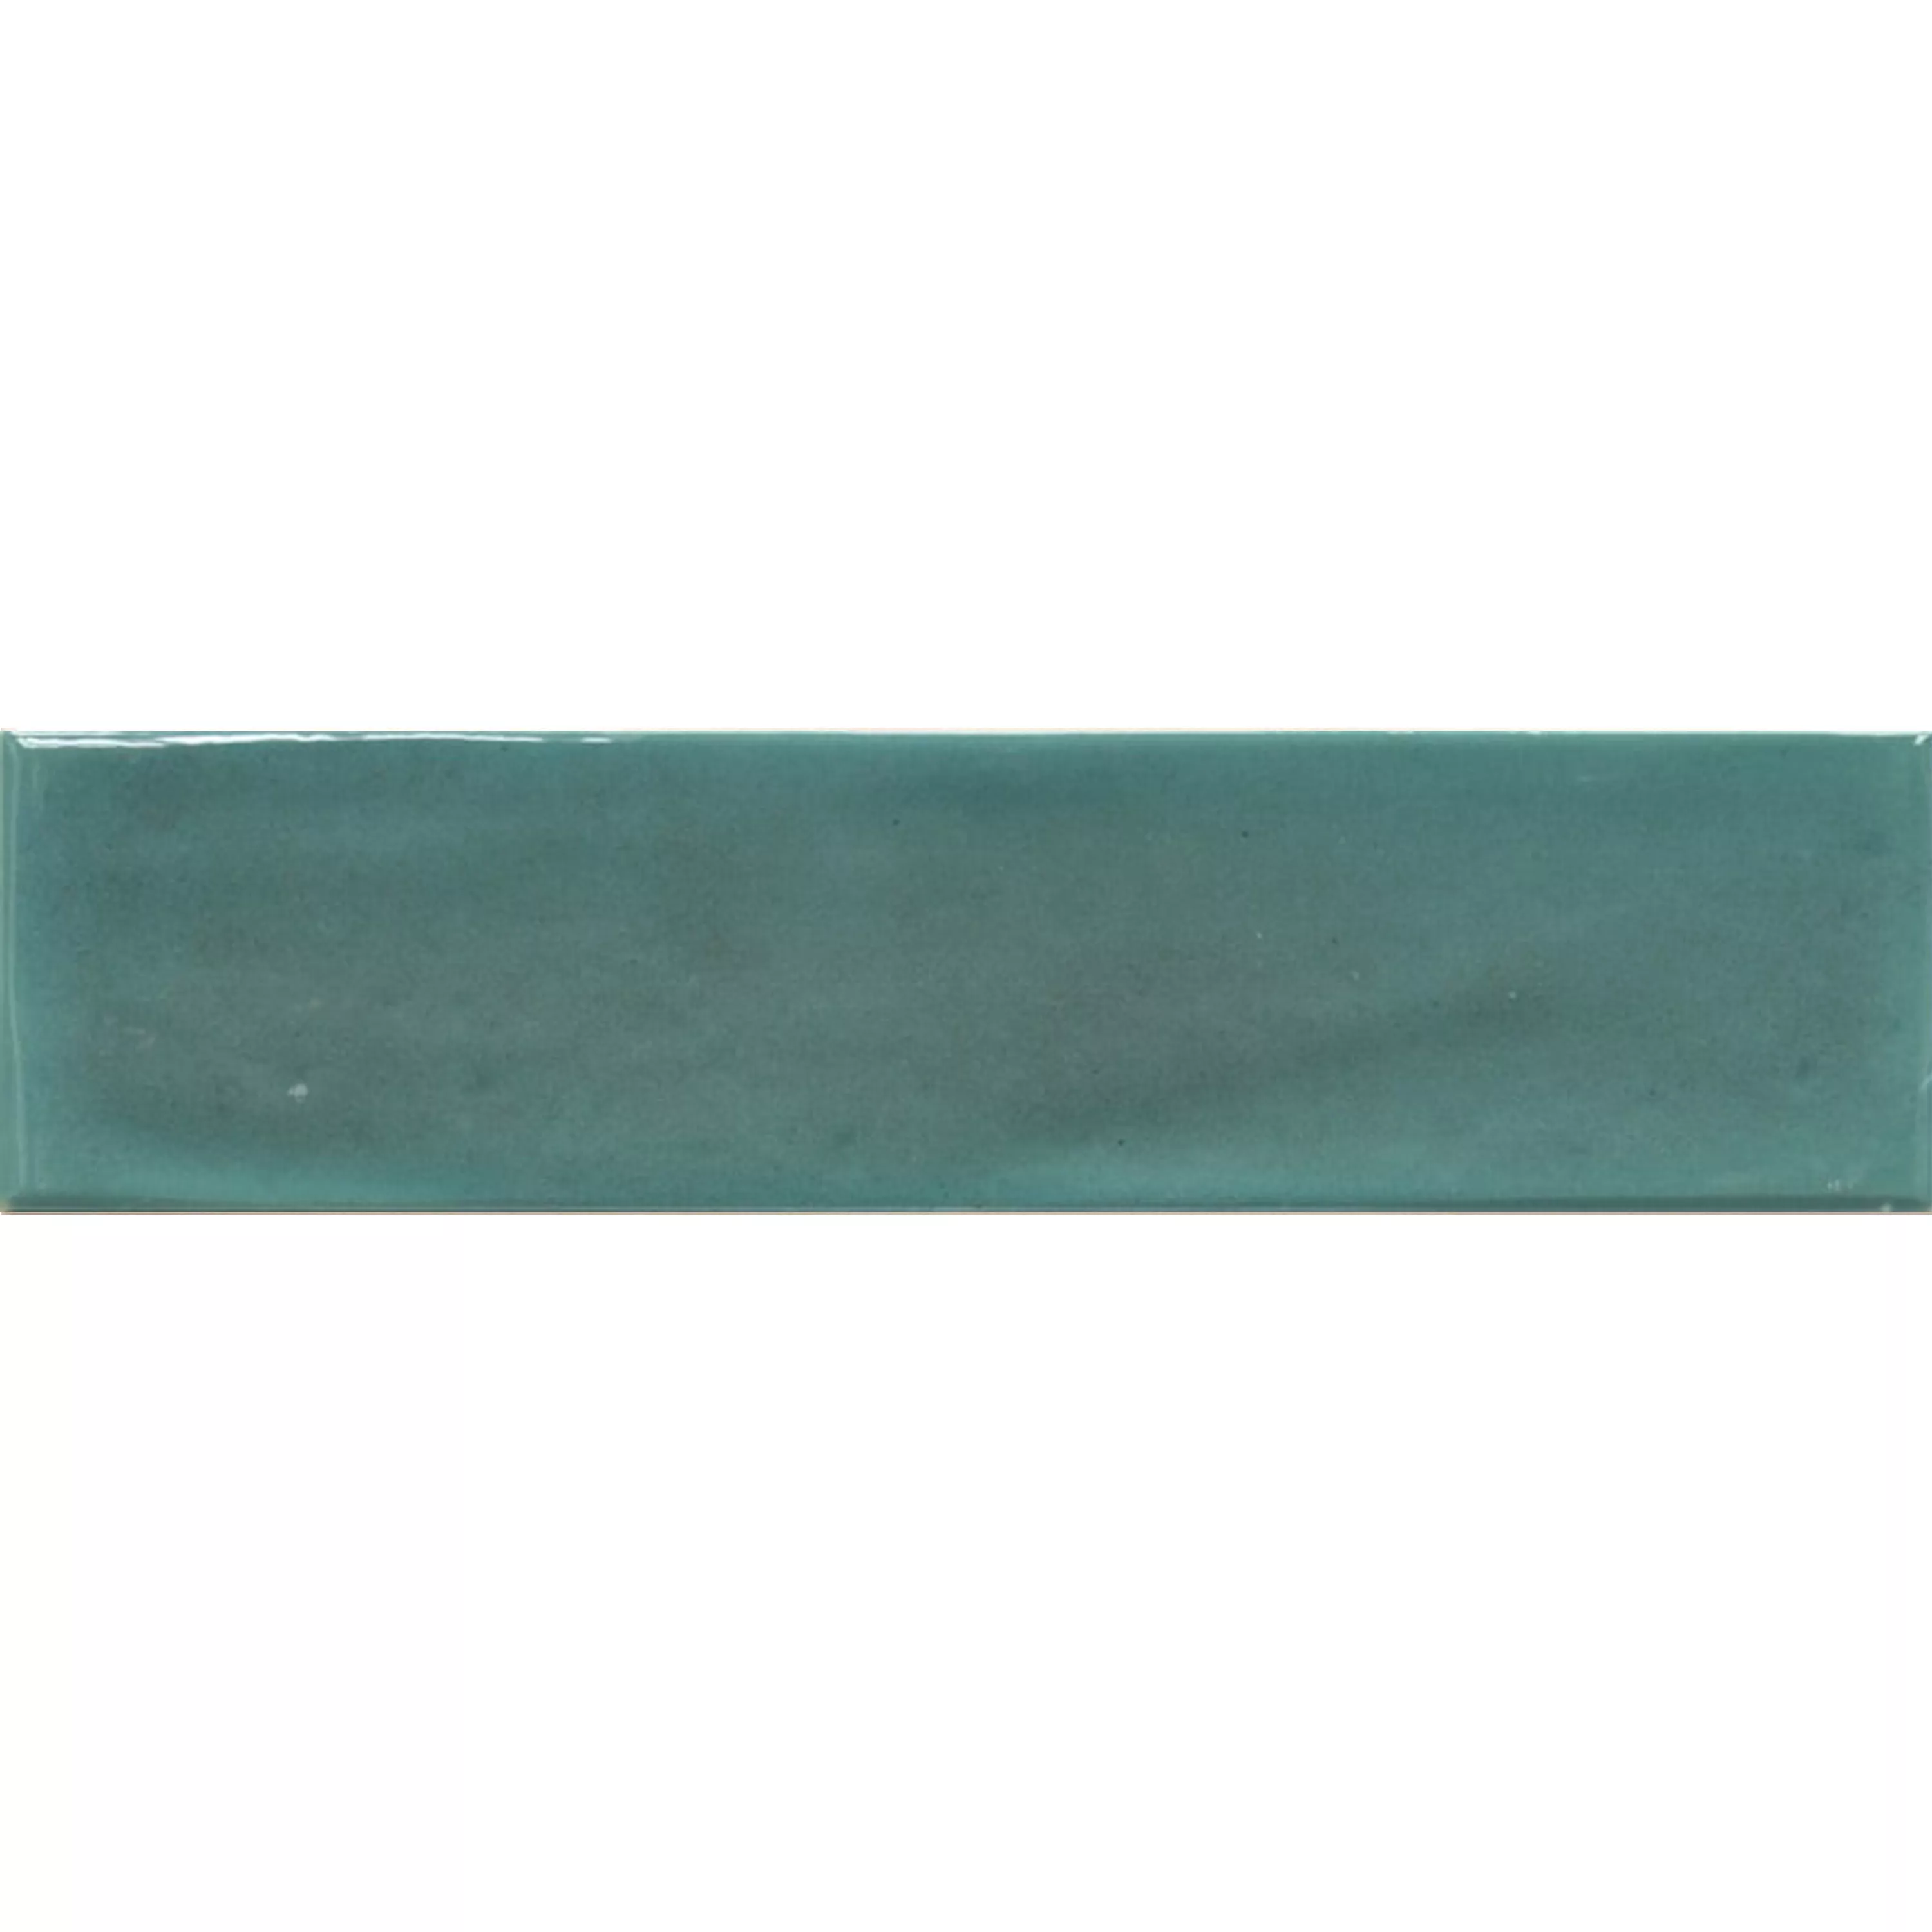 Sample Wall Tiles Conway Waved 7,5x30cm Emerald Green